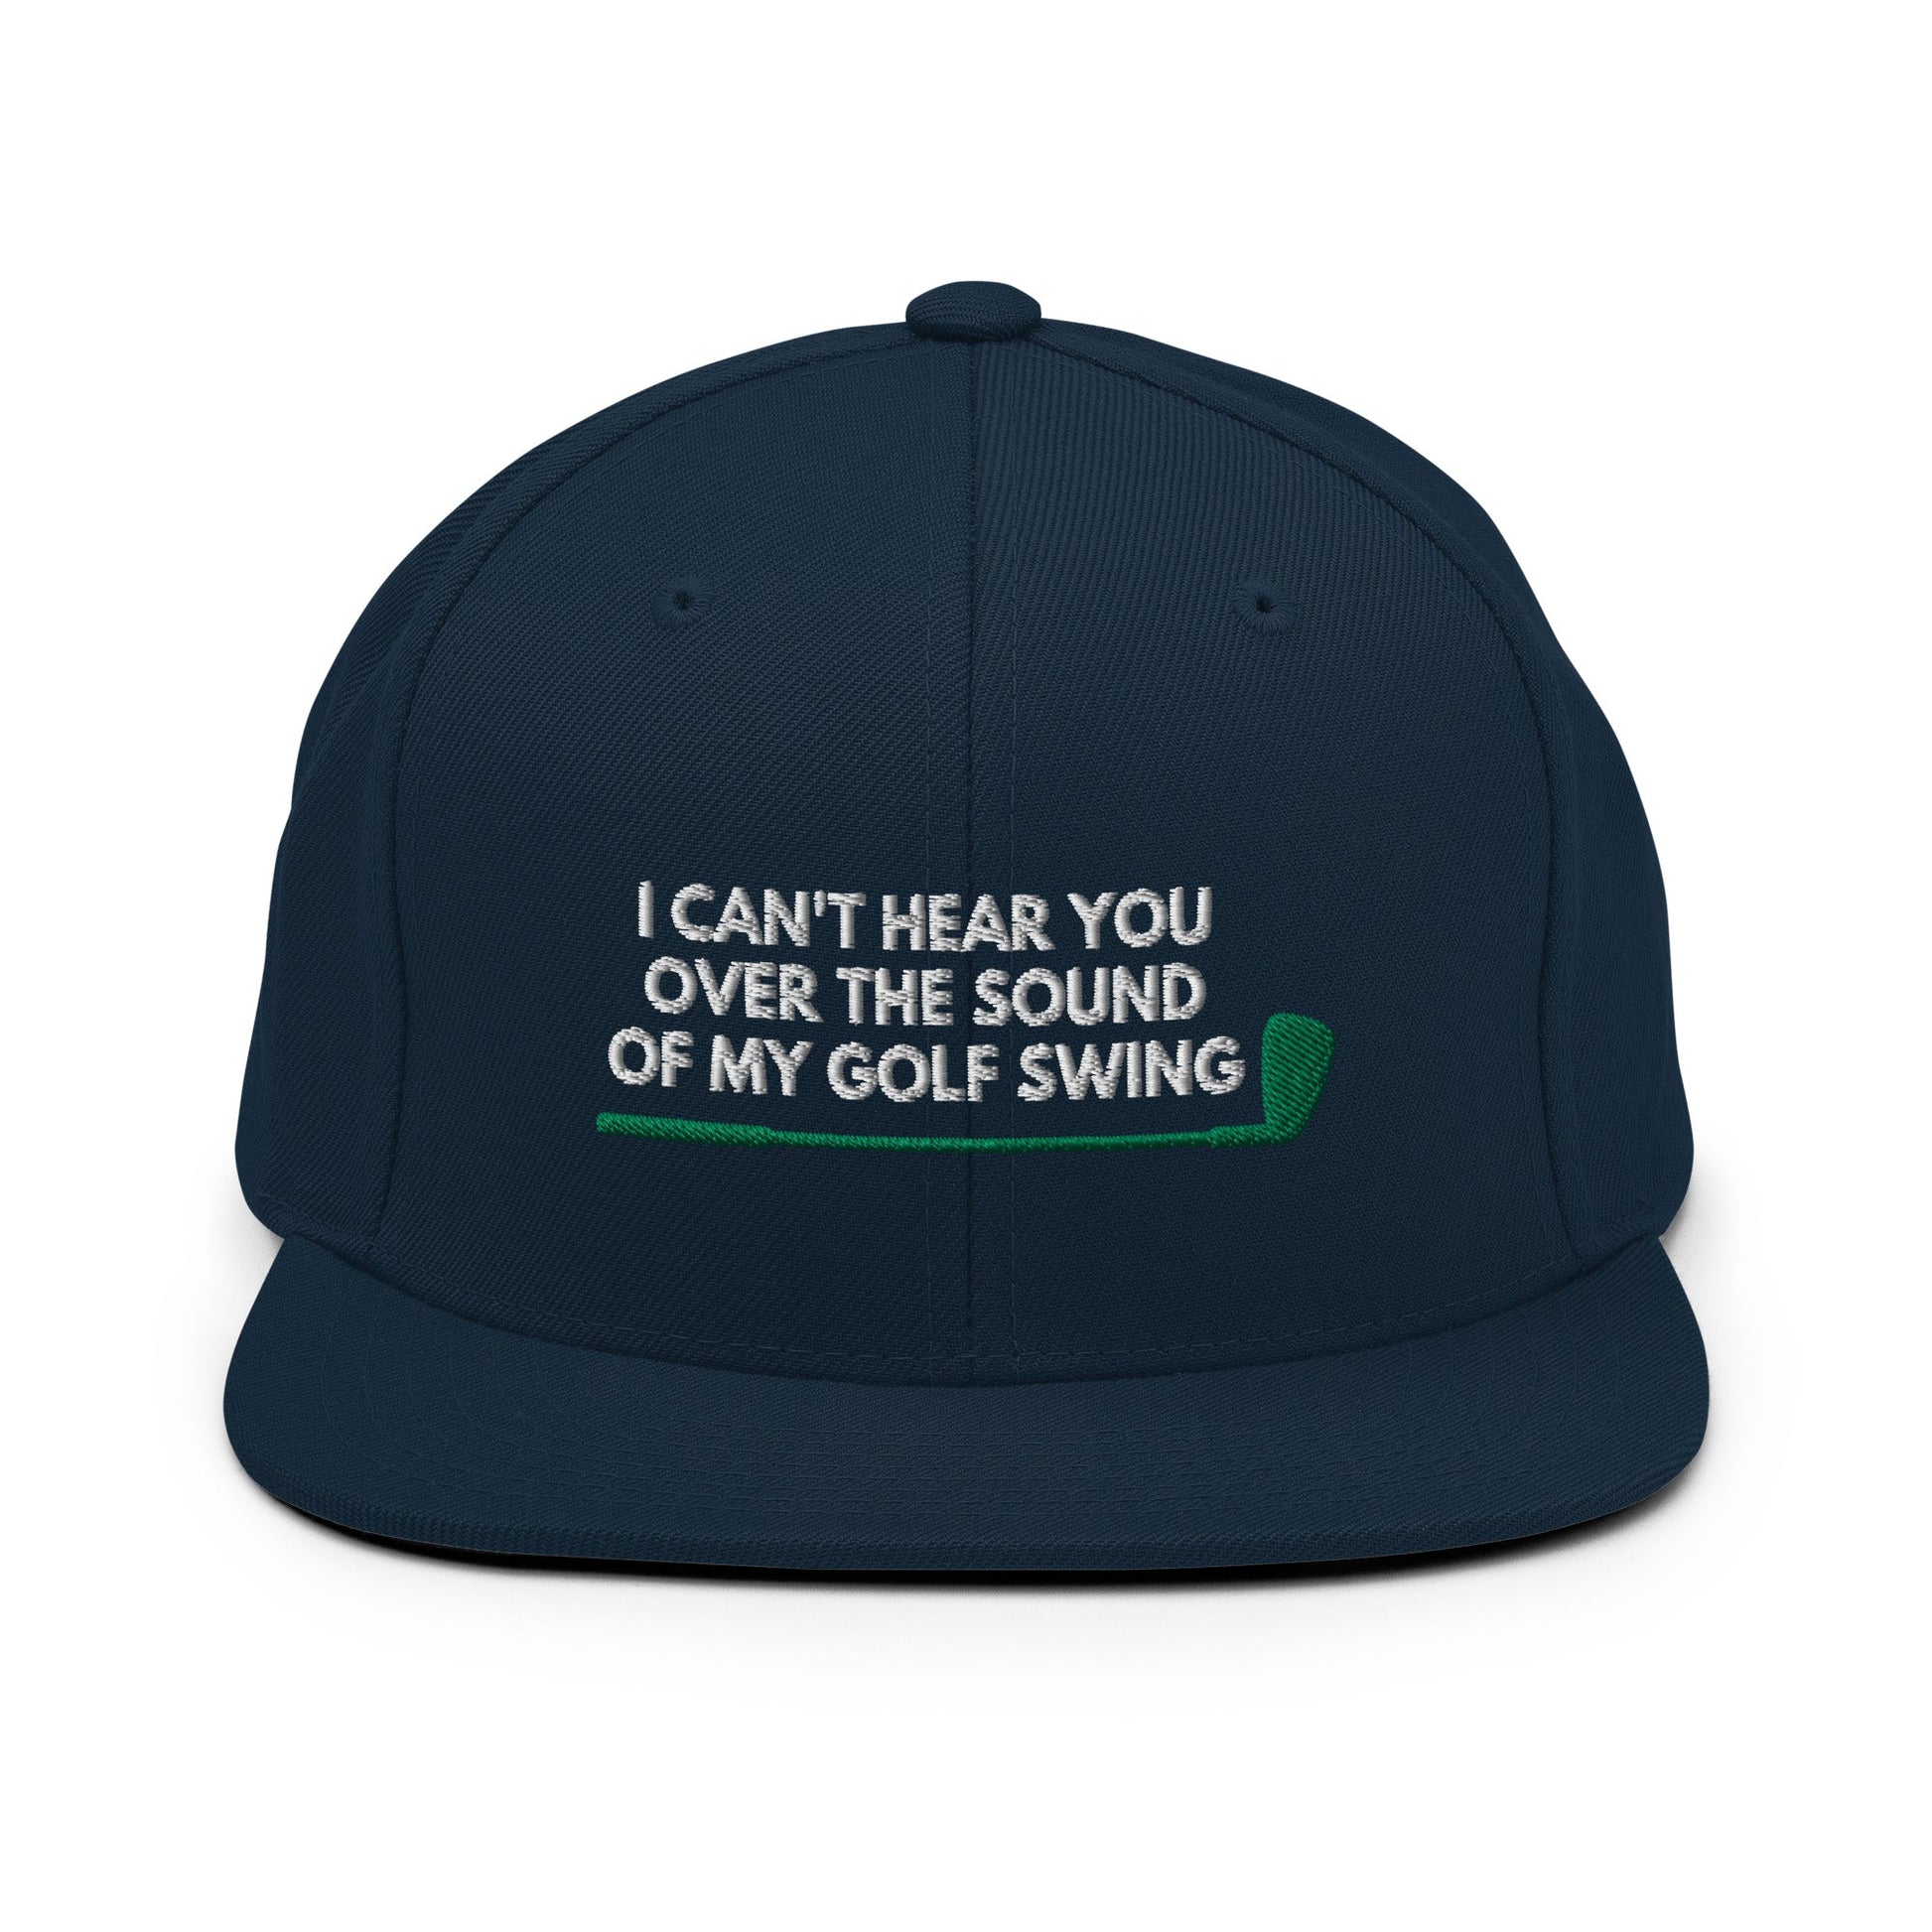 Funny Golfer Gifts  Snapback Hat Dark Navy I Cant Hear You Over The Sound Of My Golf Swing Hat Snapback Hat